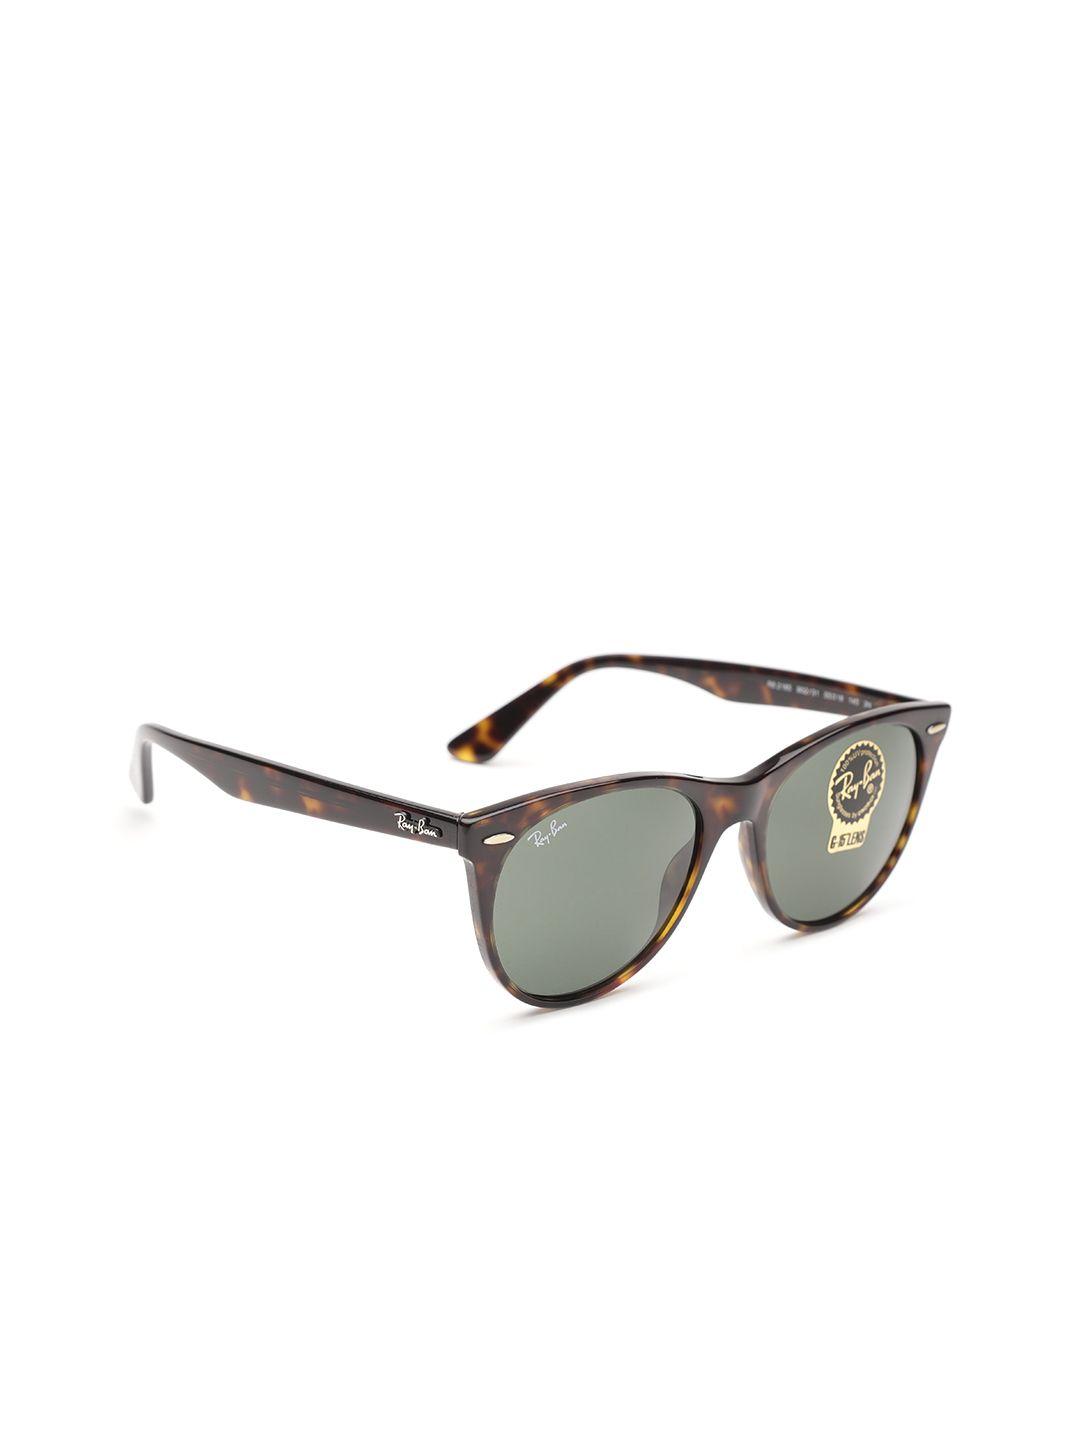 ray-ban unisex oval sunglasses 0rb2185902/31